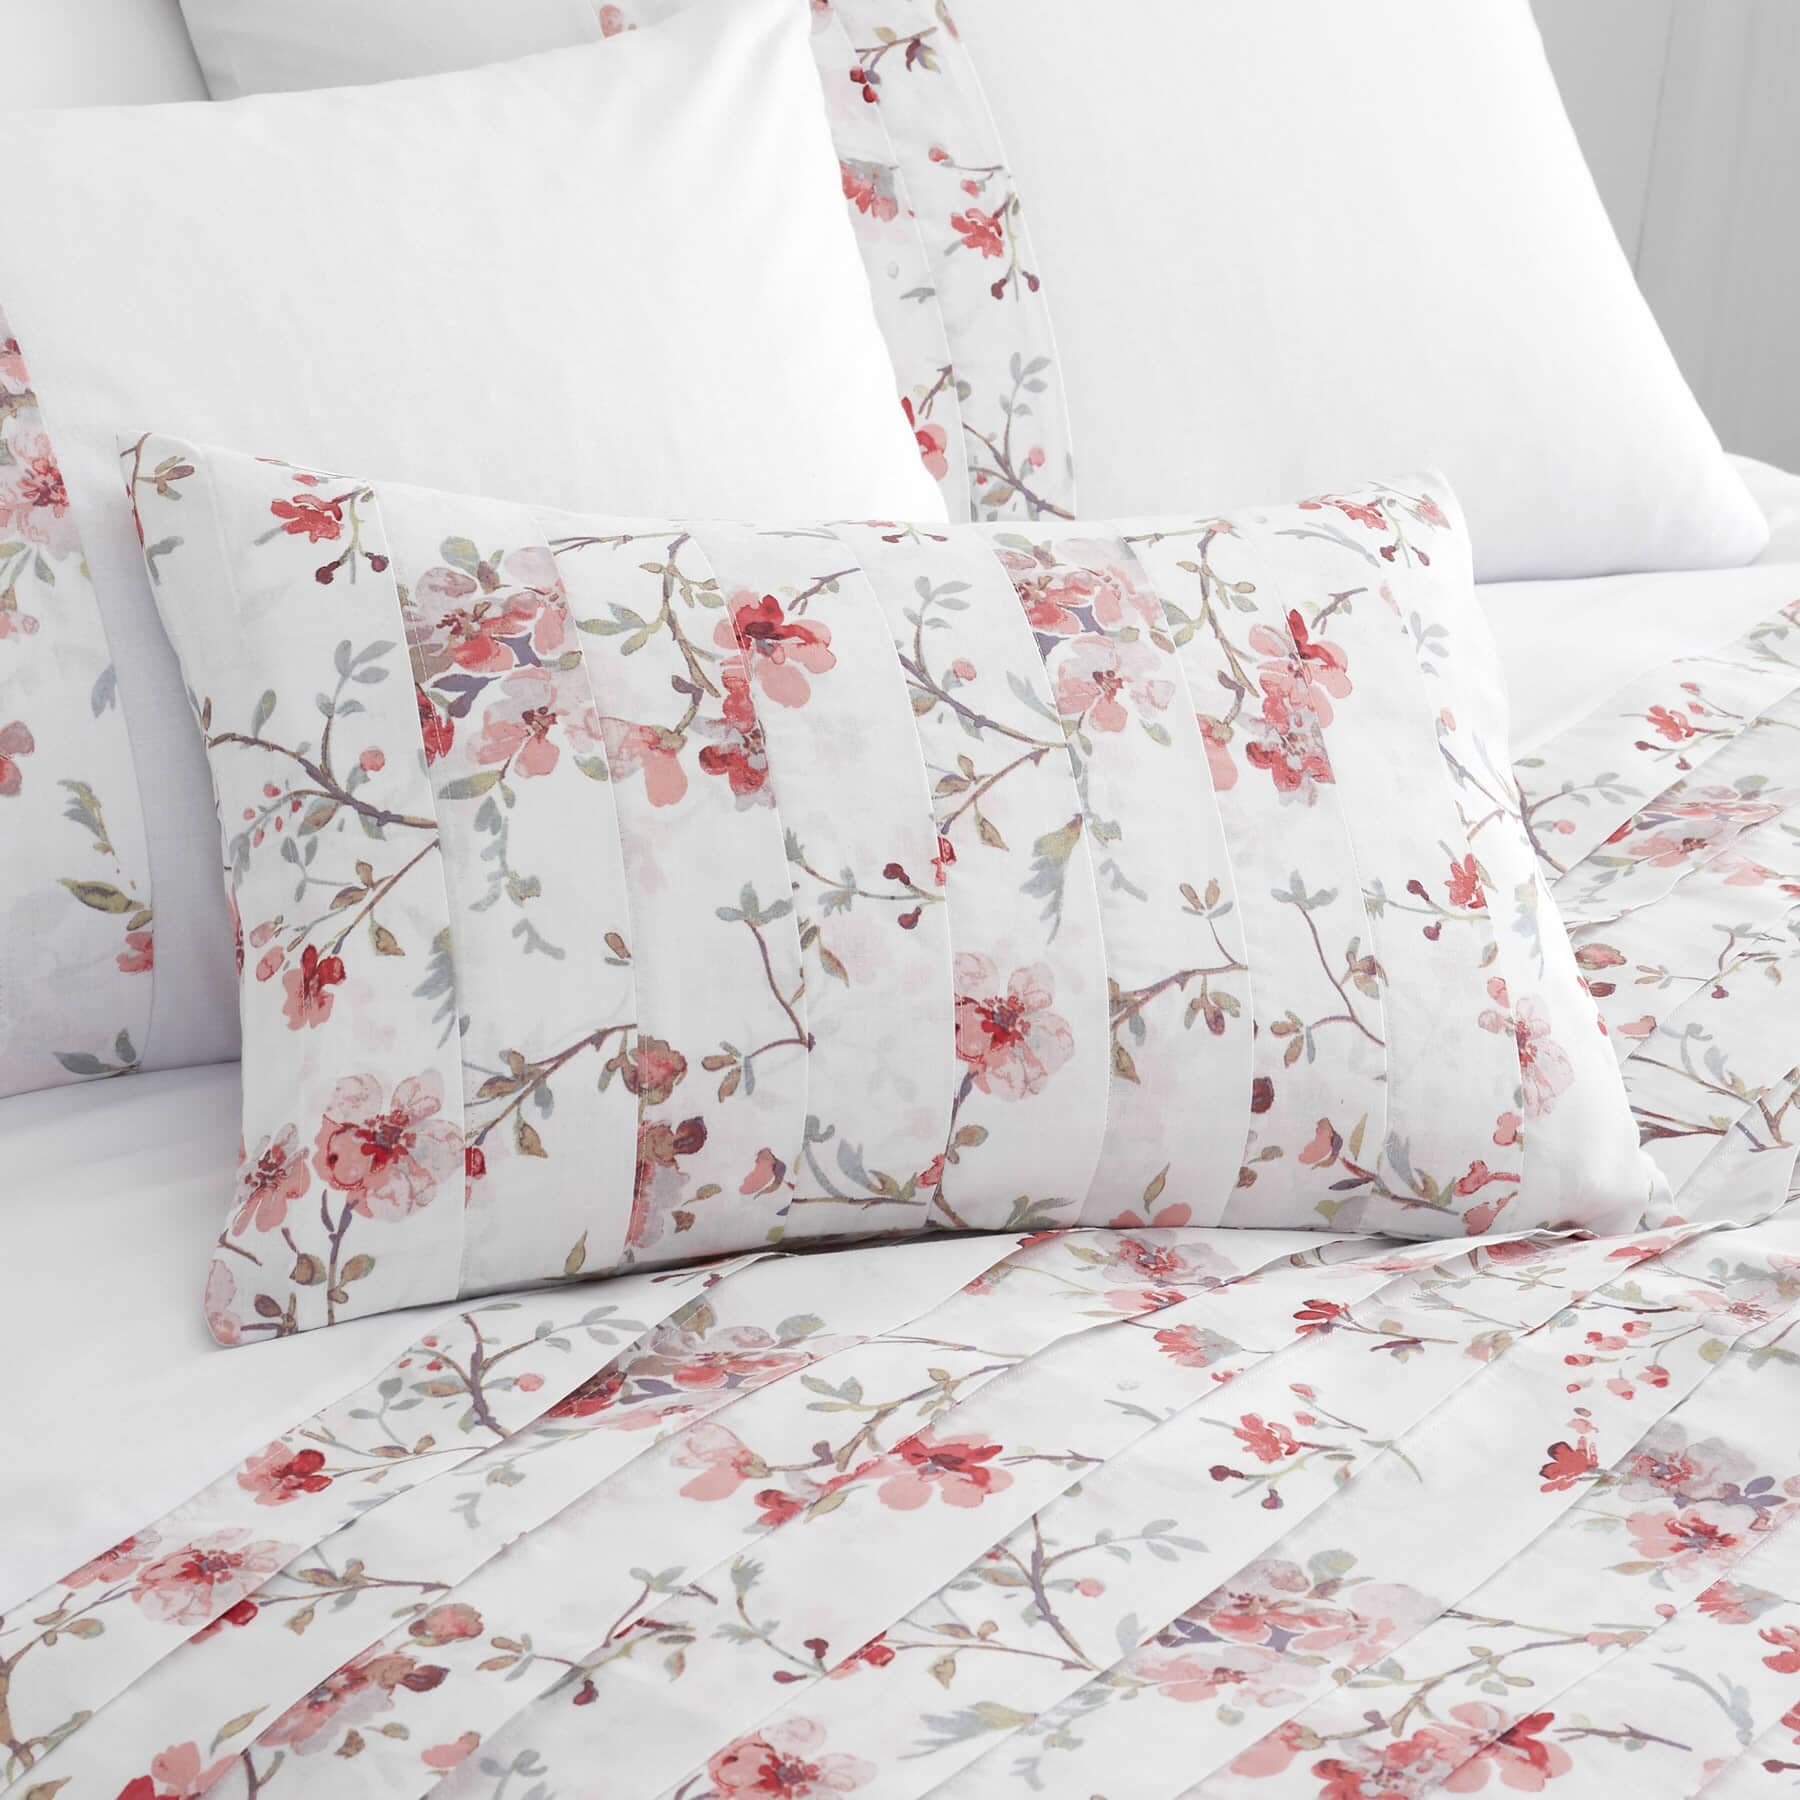 Catherine Lansfield Bedding Fresh Floral Duvet Cover Set with